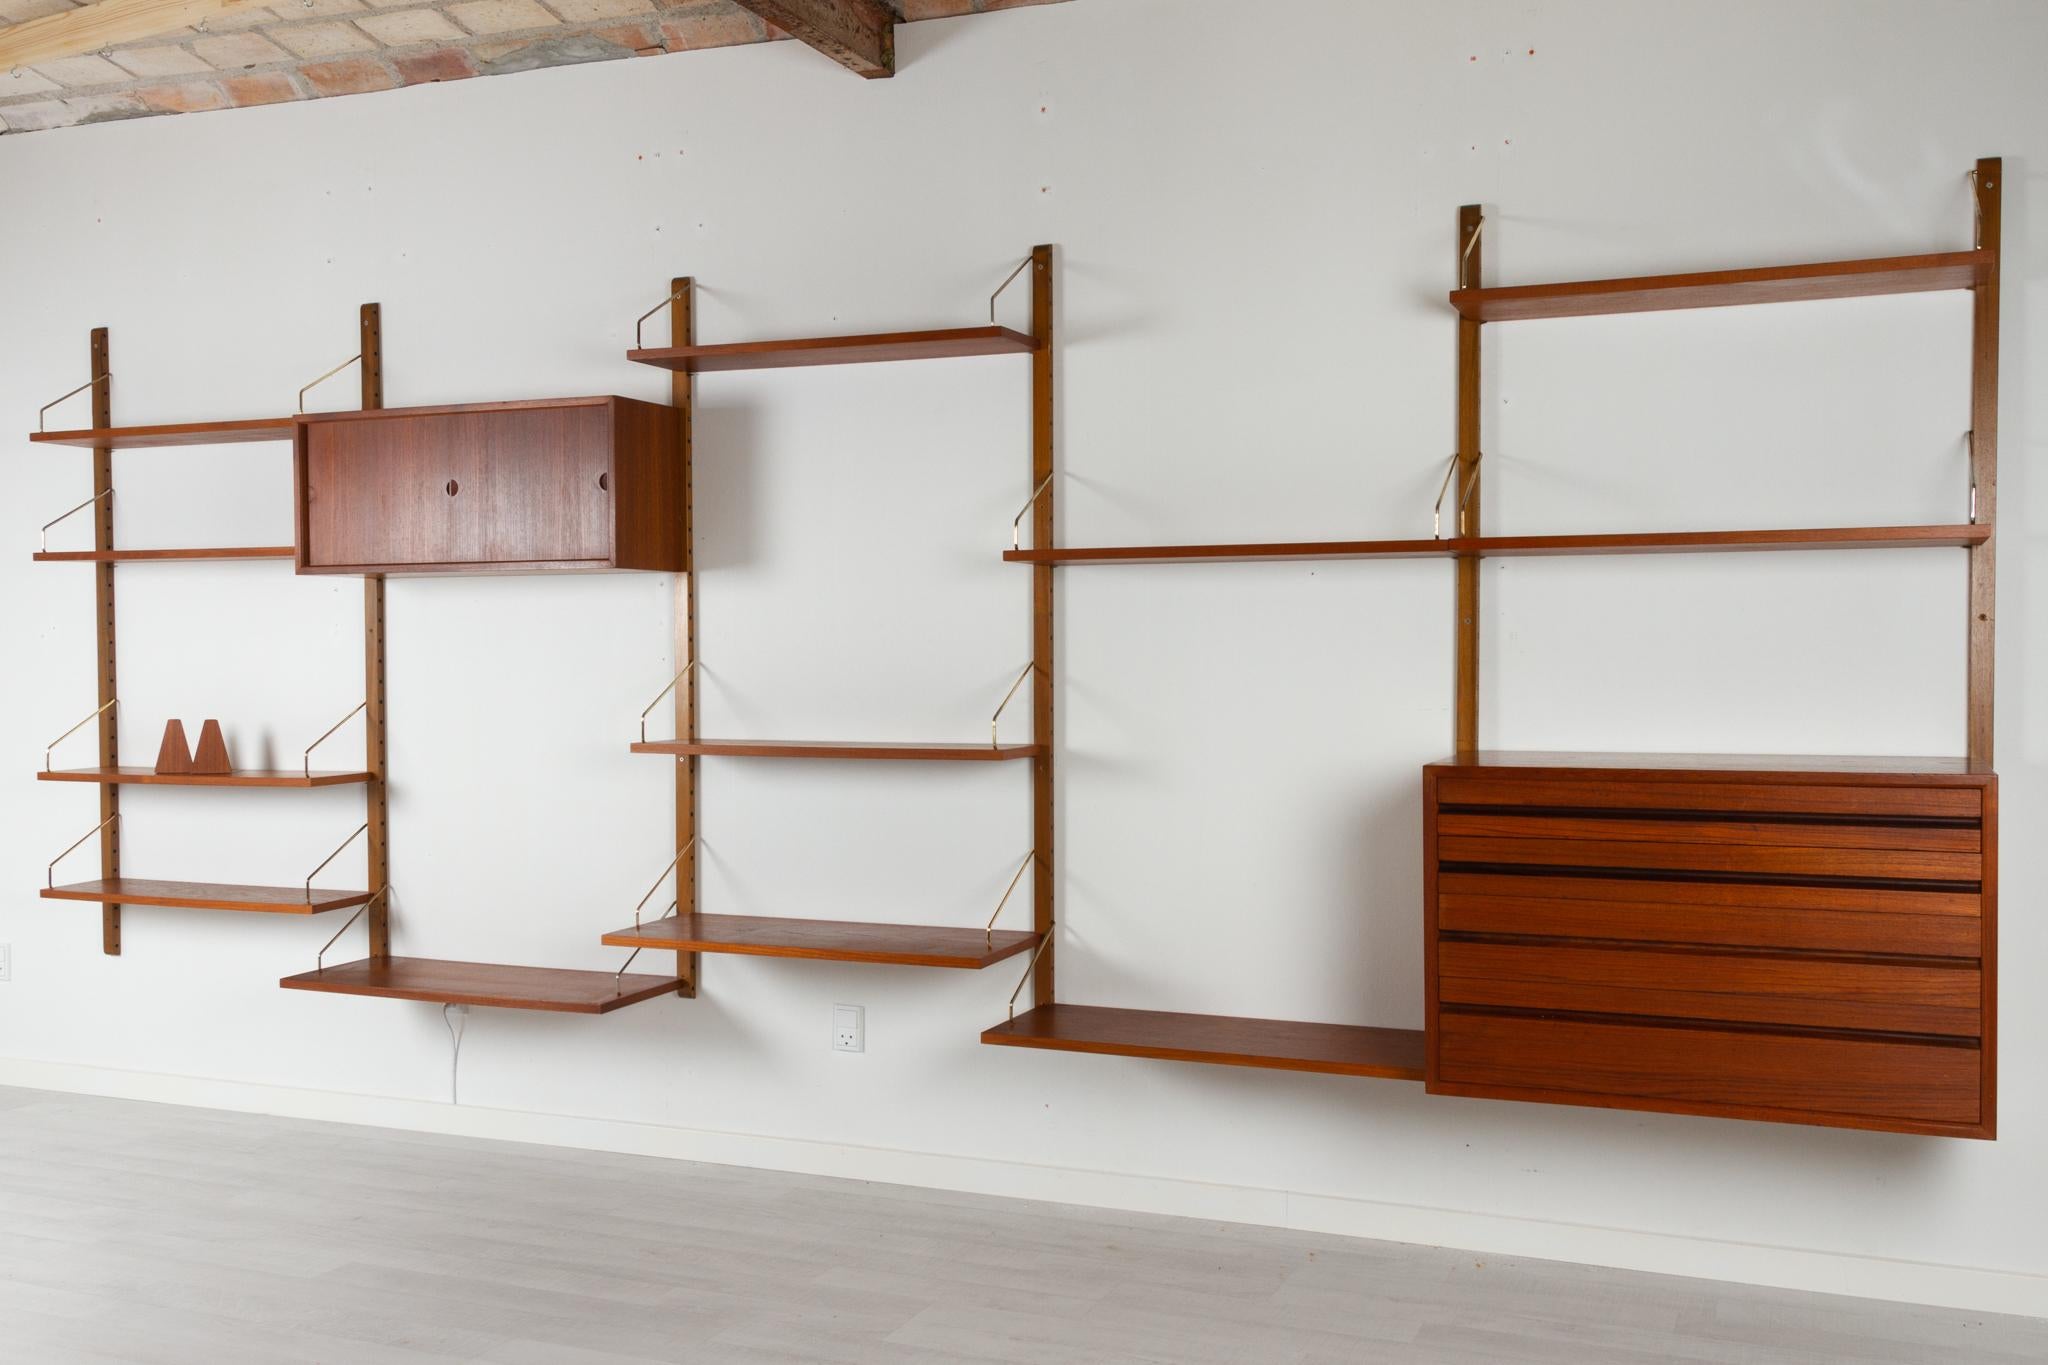 Vintage Danish teak wall unit by Poul Cadovius for Cado, 1960s.

Mid-Century Modern 5 bay shelving system model Royal. This is a original vintage floating bookcase designed in 1948 by Danish architect Poul Cadovius. 
Cadovius had the